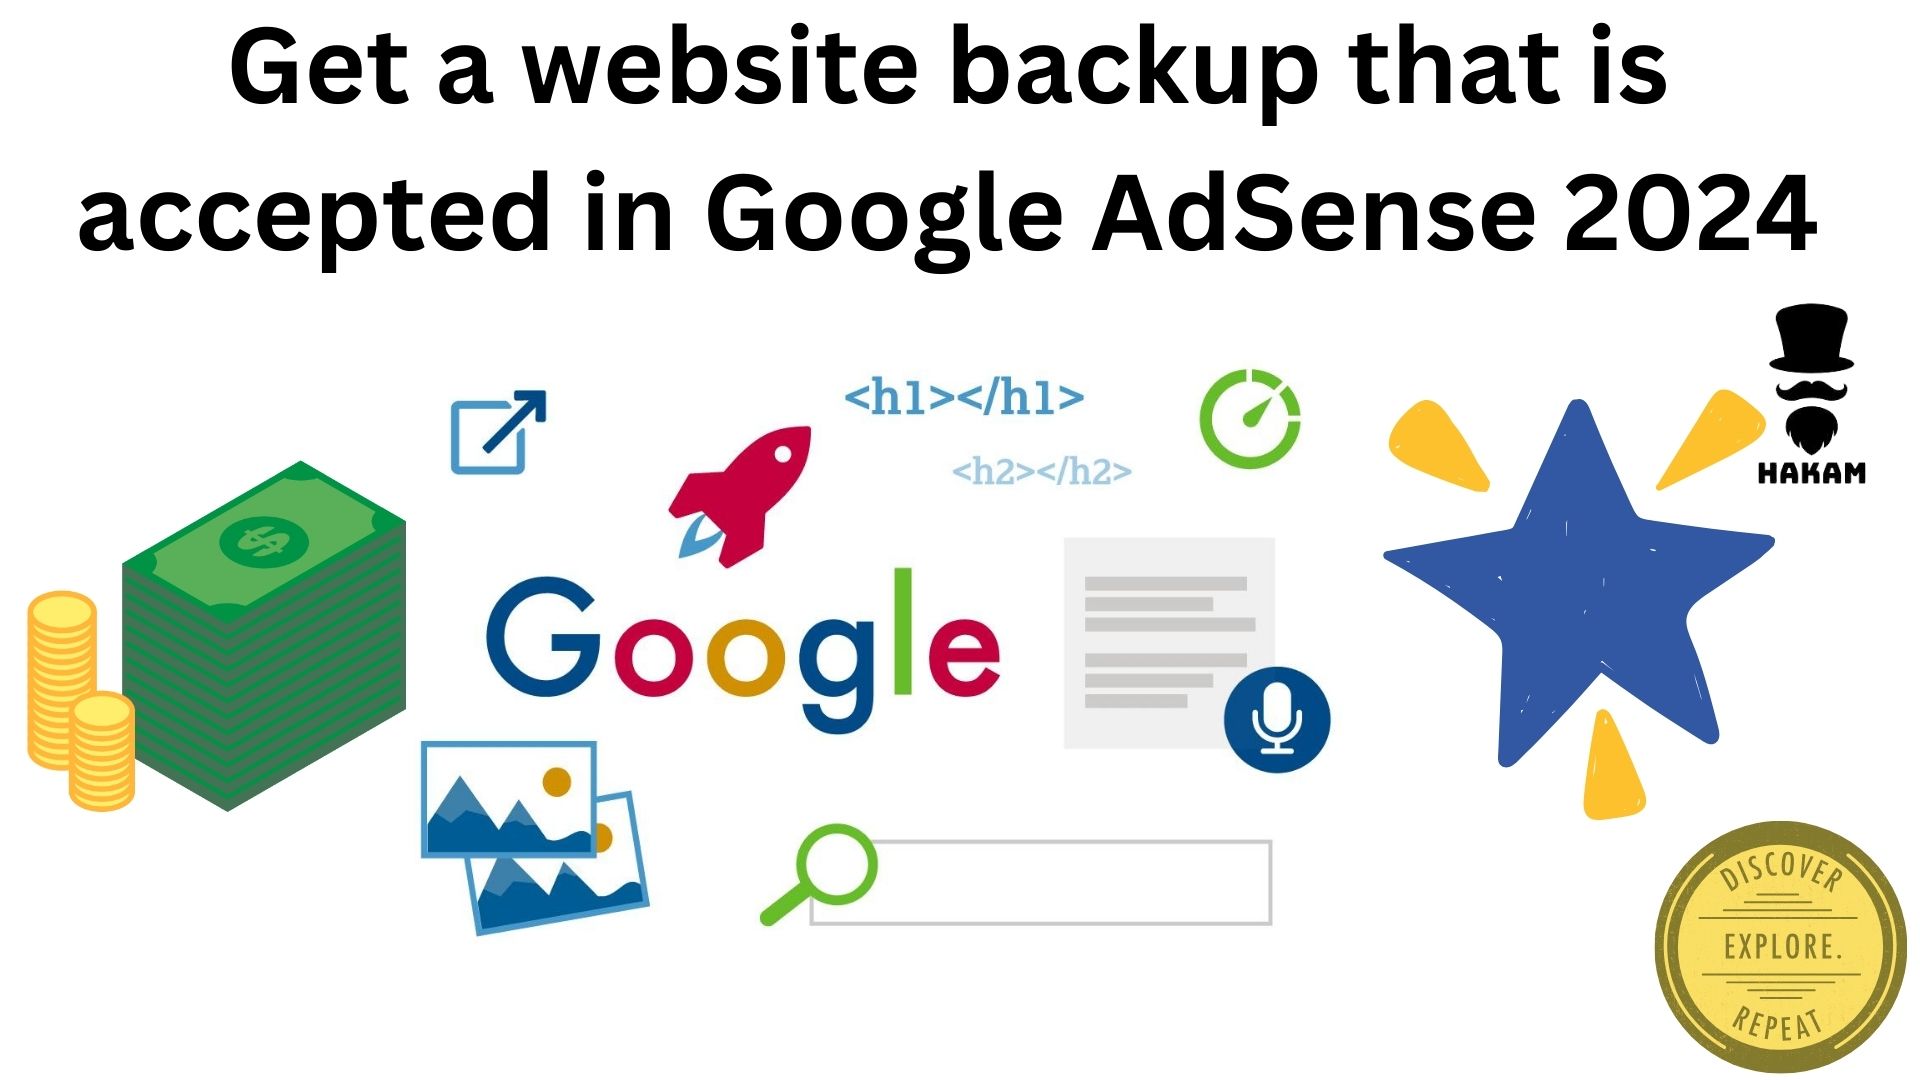 Get A Website Backup That Is Accepted In Google Adsense 2024 